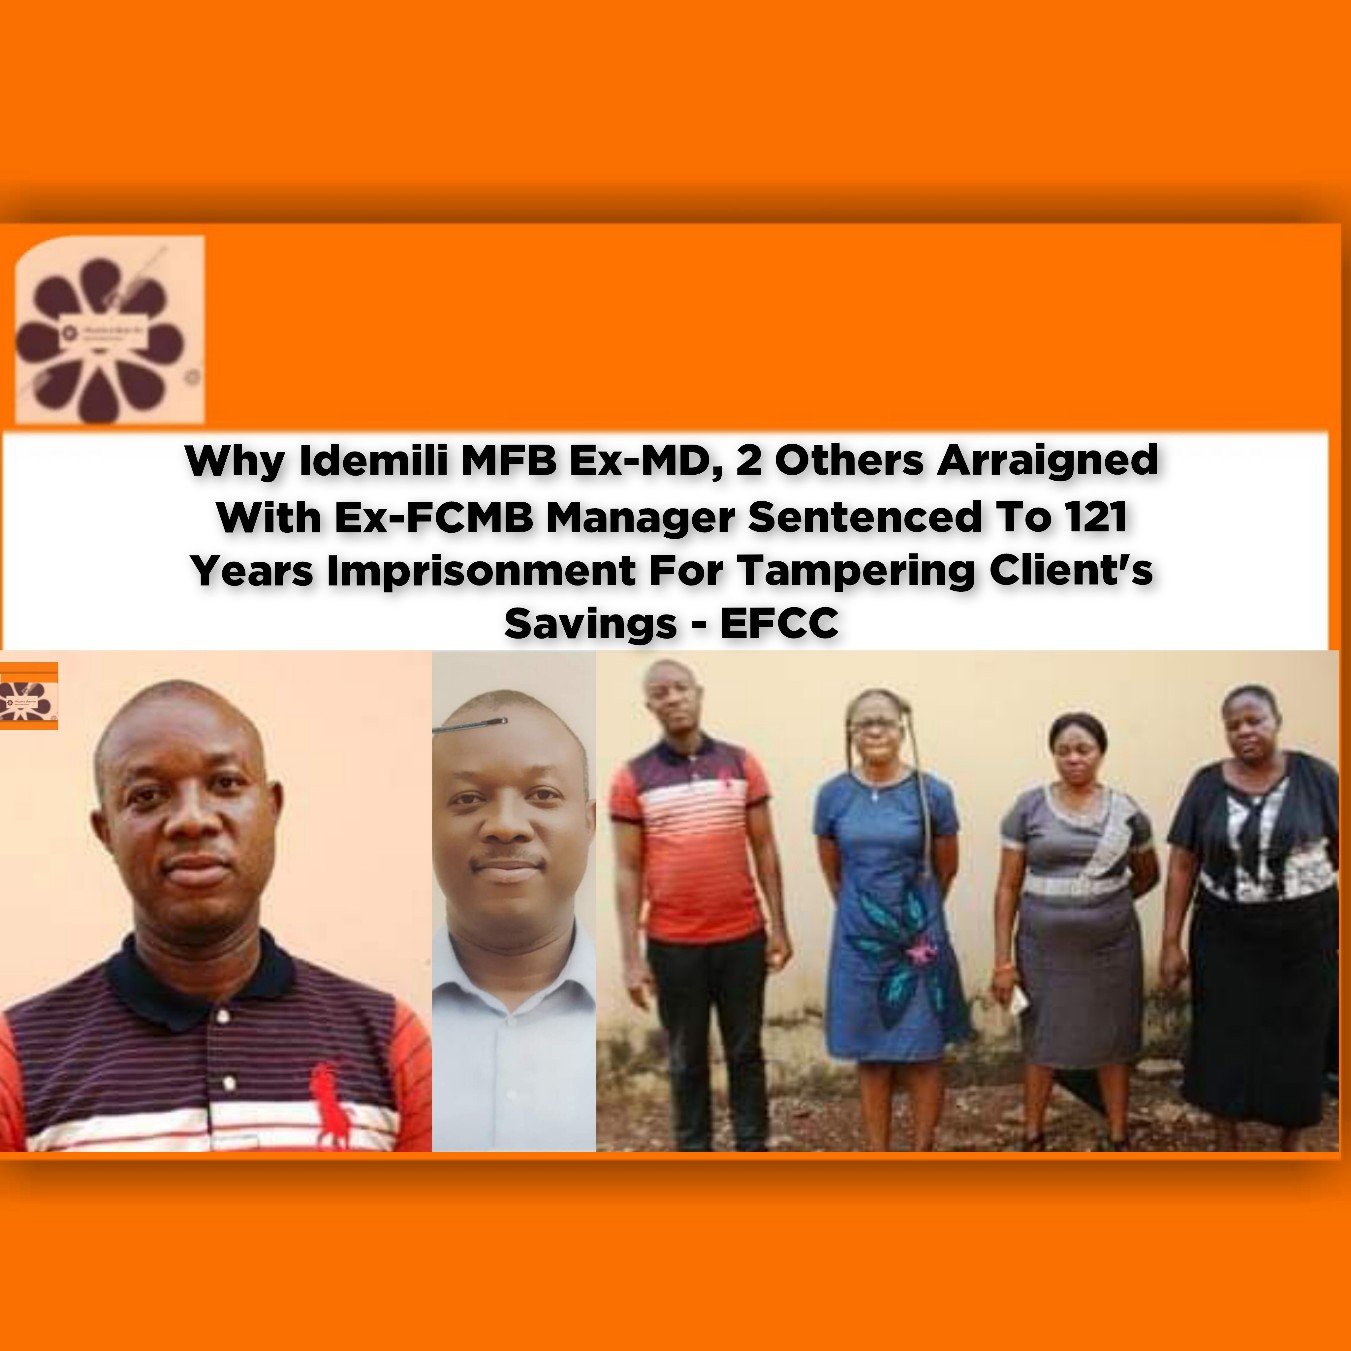 Why Idemili MFB Ex-MD, 2 Others Arraigned With Ex-FCMB Manager Sentenced To 121 Years Imprisonment For Tampering Client's Savings - EFCC ~ OsazuwaAkonedo #demotes,